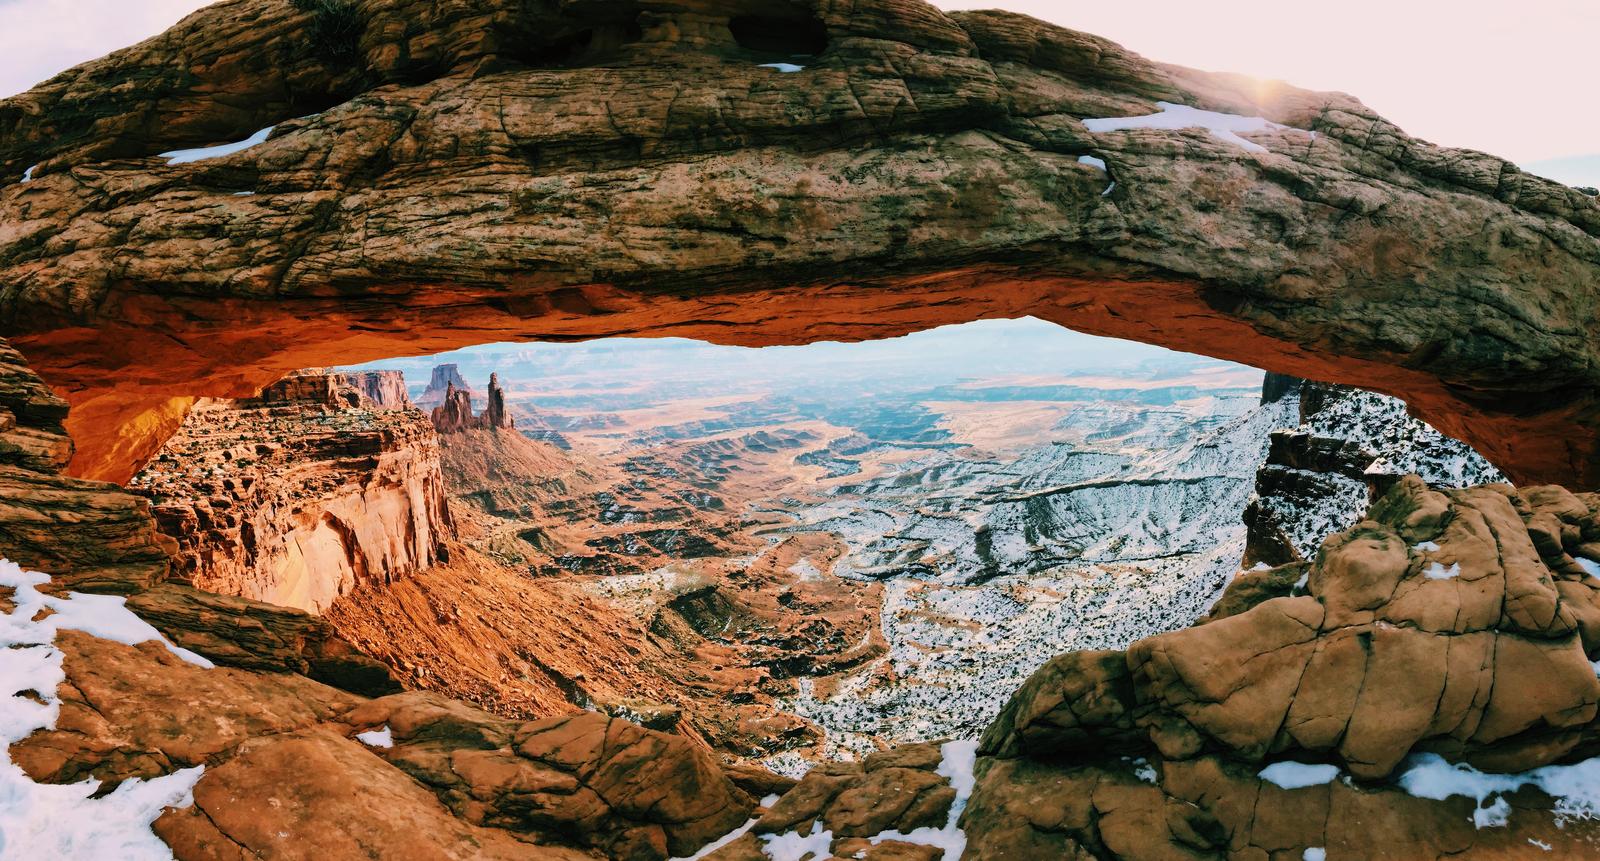 Can You Match These Extraordinary Natural Features to Their Respective Countries? Canyonlands National Park, Utah